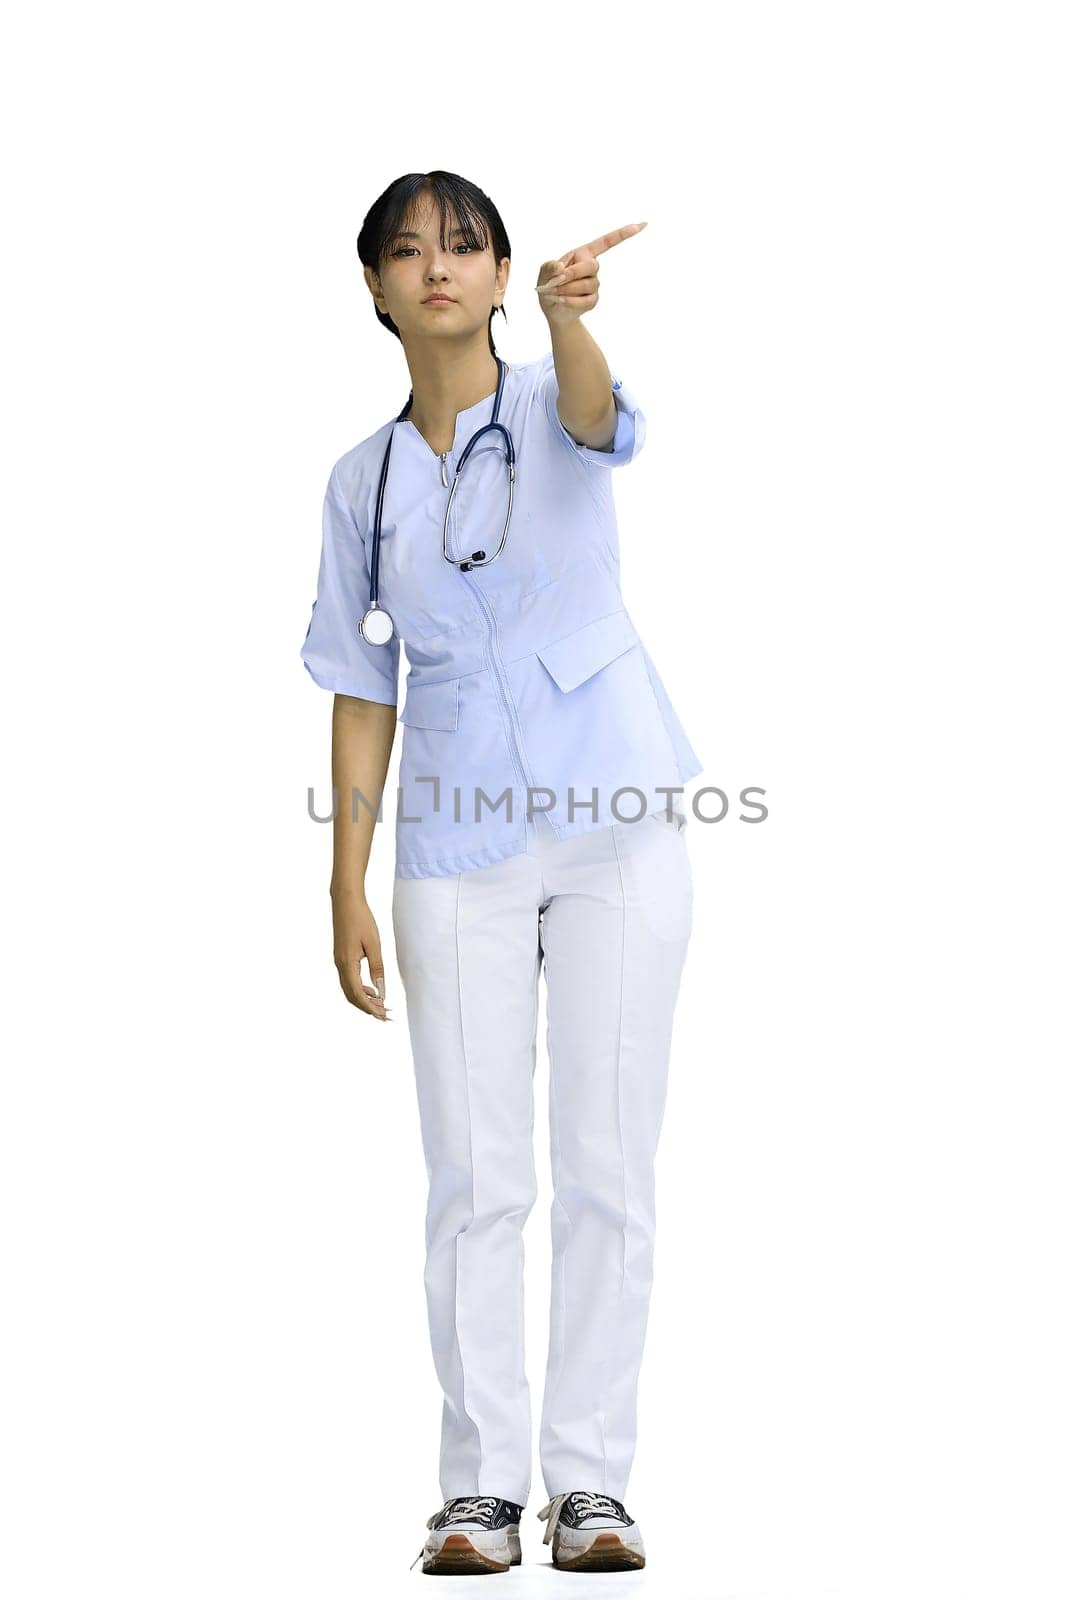 The doctor's girl, on a white background, in full height, points to the side.